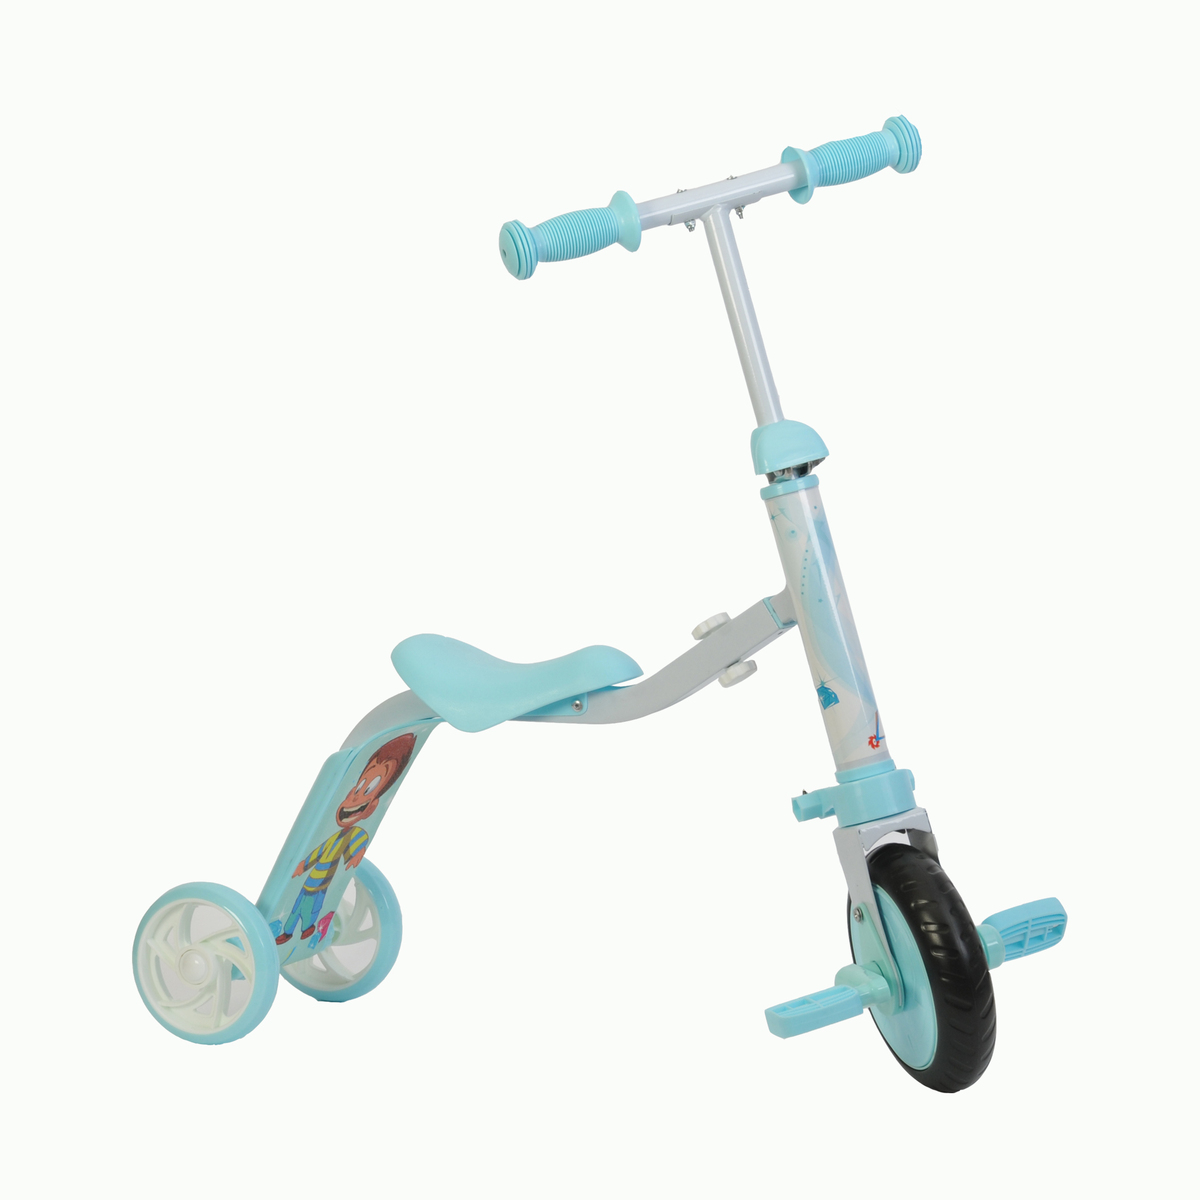 Skid Fusion Kick Scooter 3Wheel L-609 Assorted Color